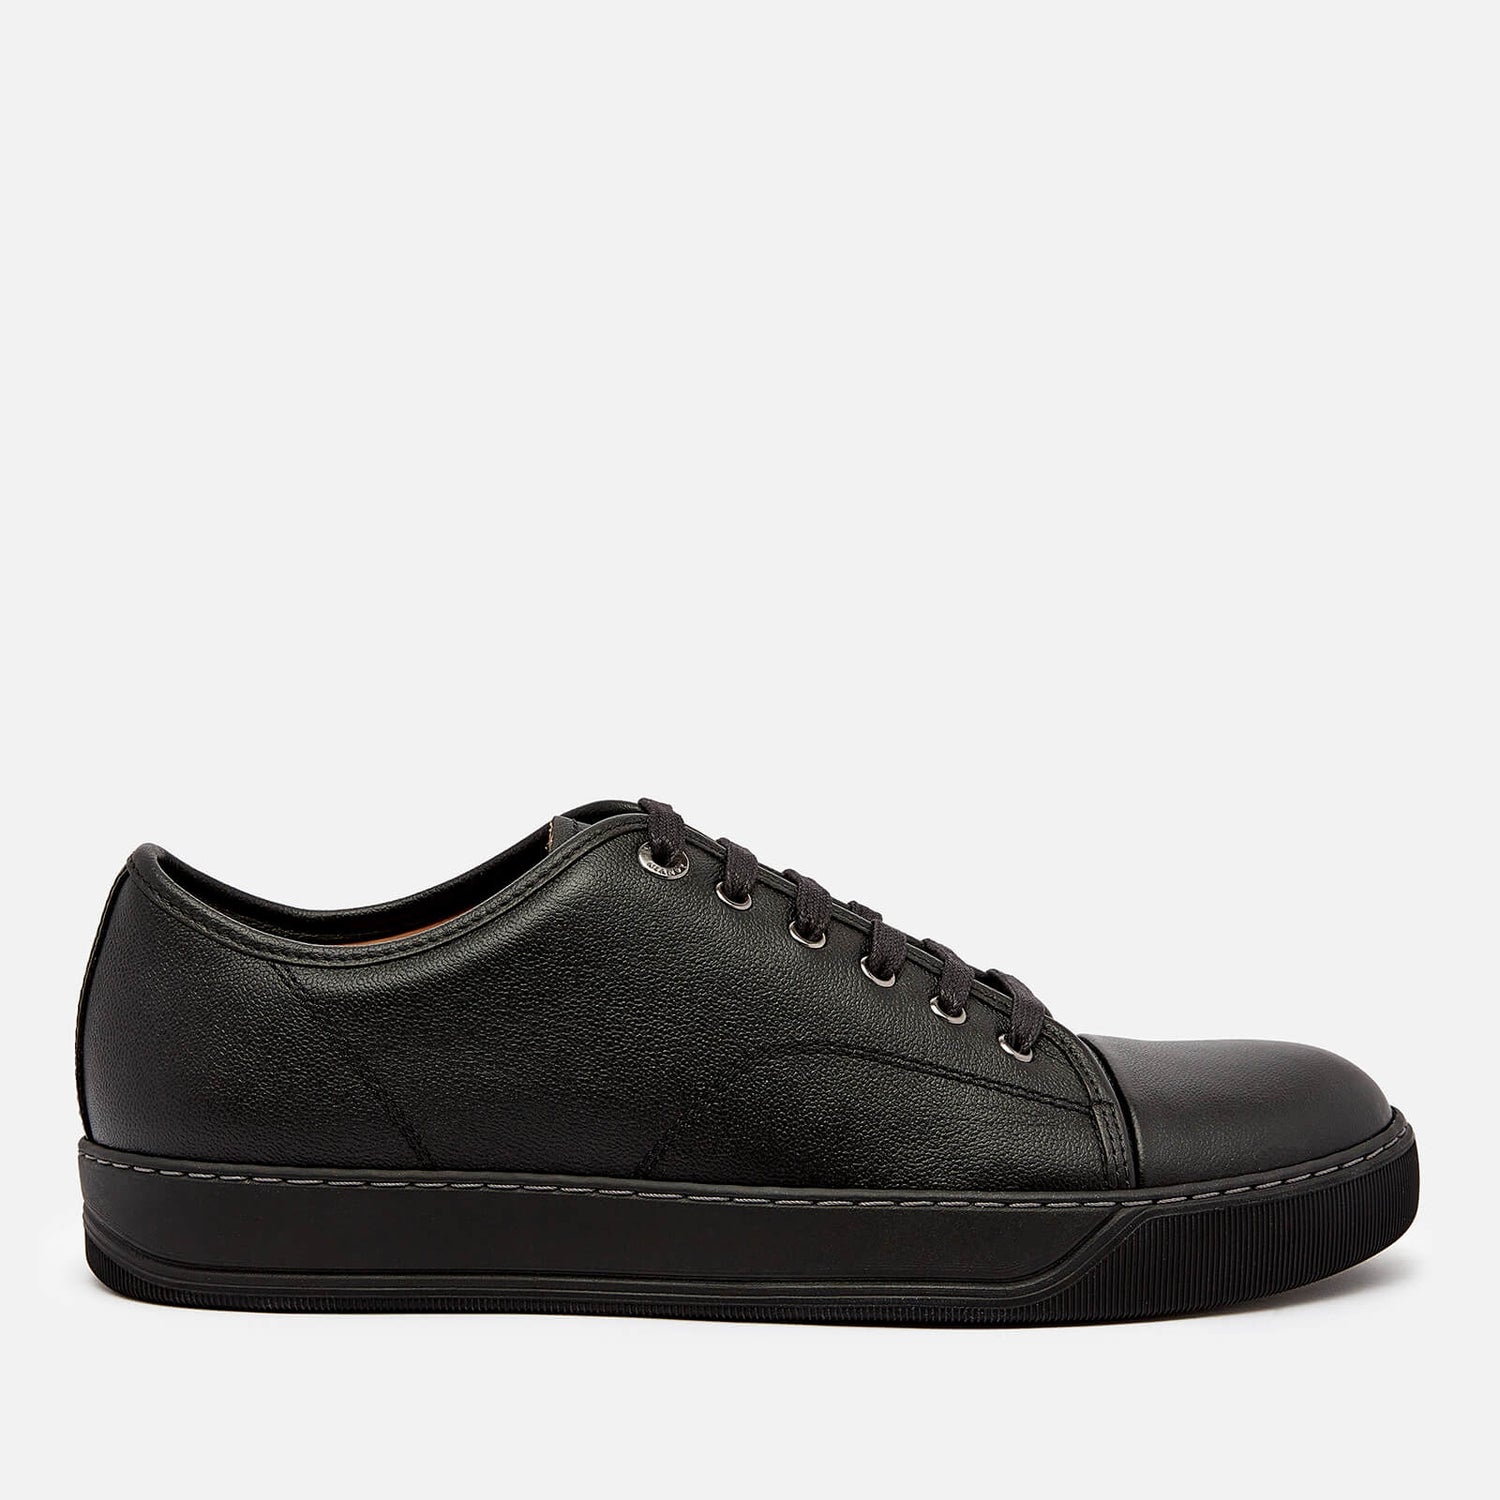 Lanvin Men's Dbb1 Trainers - Black - Free UK Delivery Available